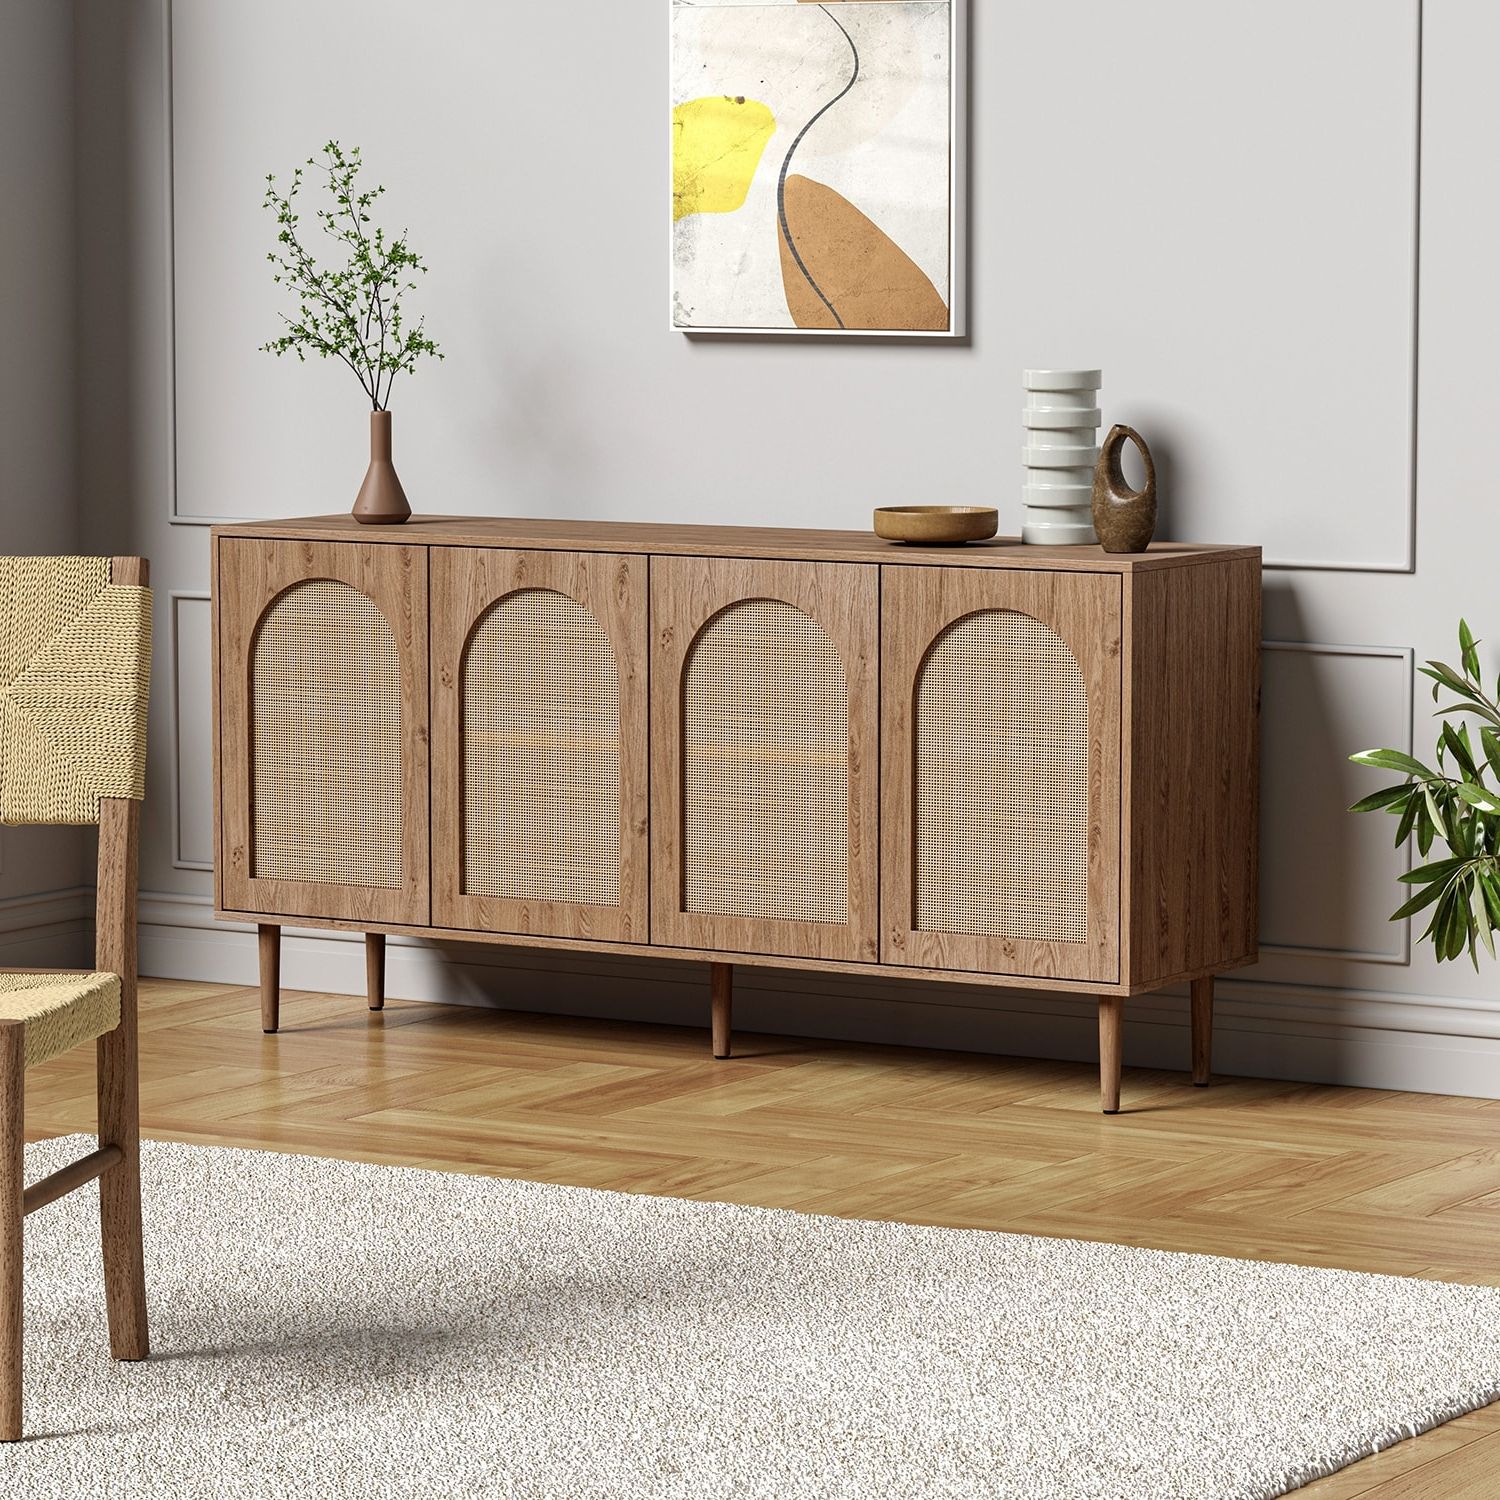 Uirico Multifunctional Buffet Sideboard Cabinet With Rattan Design Hulala Home – On Sale – Bed Bath & Beyond – 37218719 Pertaining To 2019 Assembled Rattan Buffet Sideboards (Photo 12 of 15)